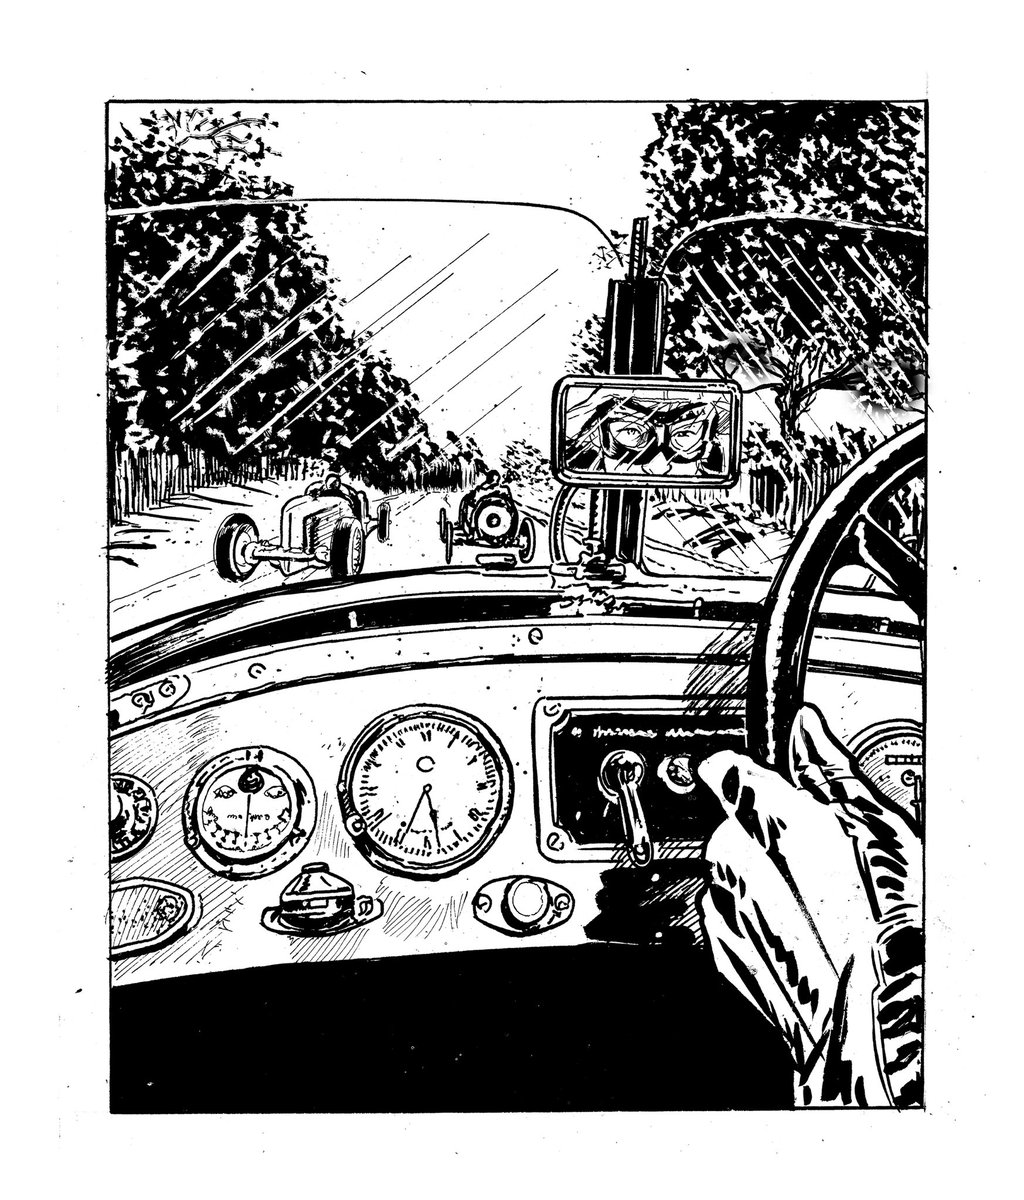 Vintage race cars—Pen and ink 🖊 Comic panel, from The Tommy Gun Dolls Vol prequel comic book.
#graphicnovel #1920s #racecardriver #vintageracer #boardtrackracer #penandink #linedrawing #pendrawing #comics #portrait #lineart #inkbrush #pen #rotring #brushpen